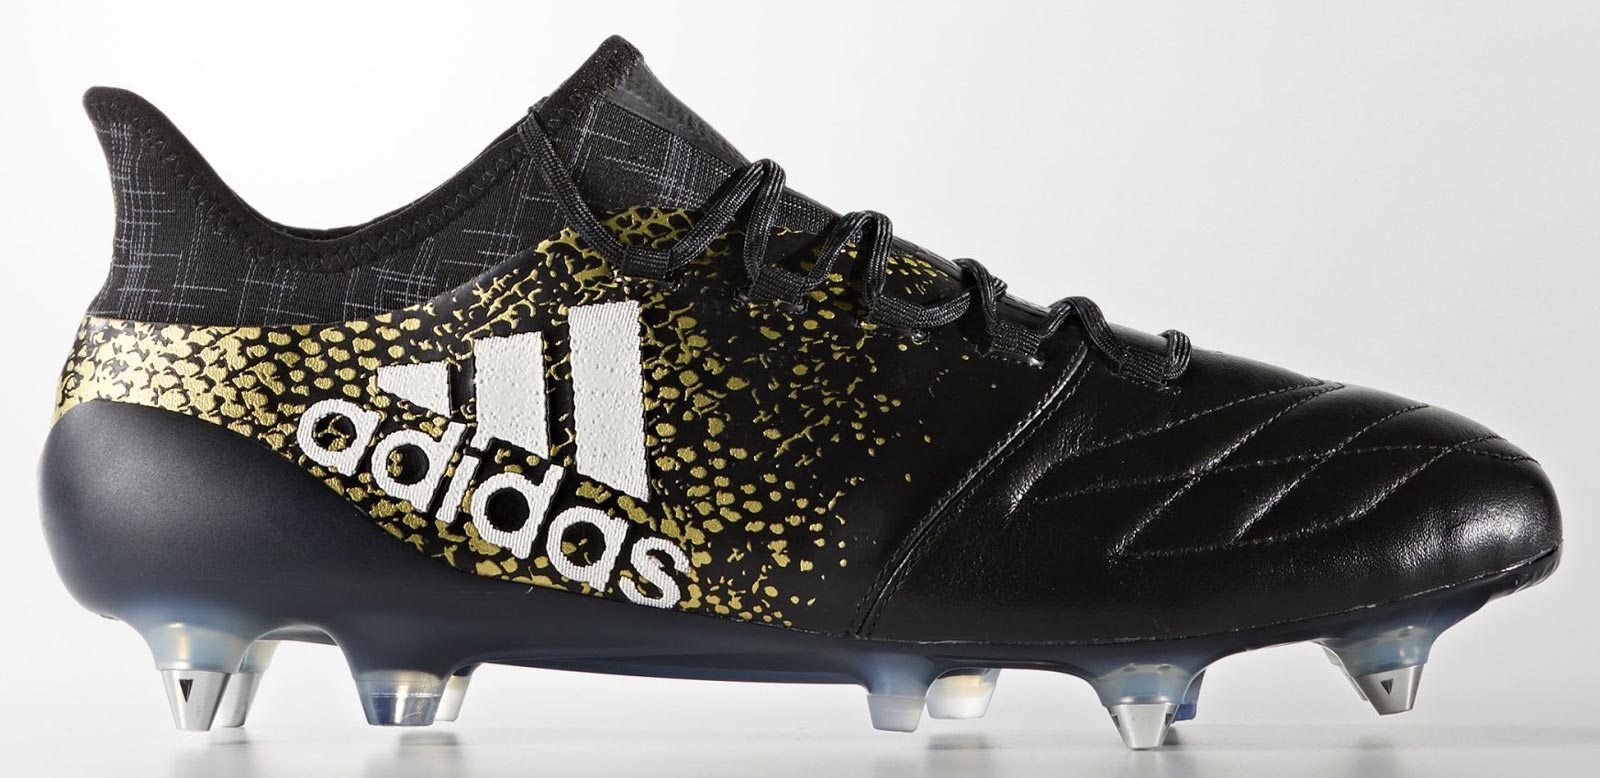 Black / Gold Adidas X 16.1 Leather 2016-2017 Boots Released Footy Headlines